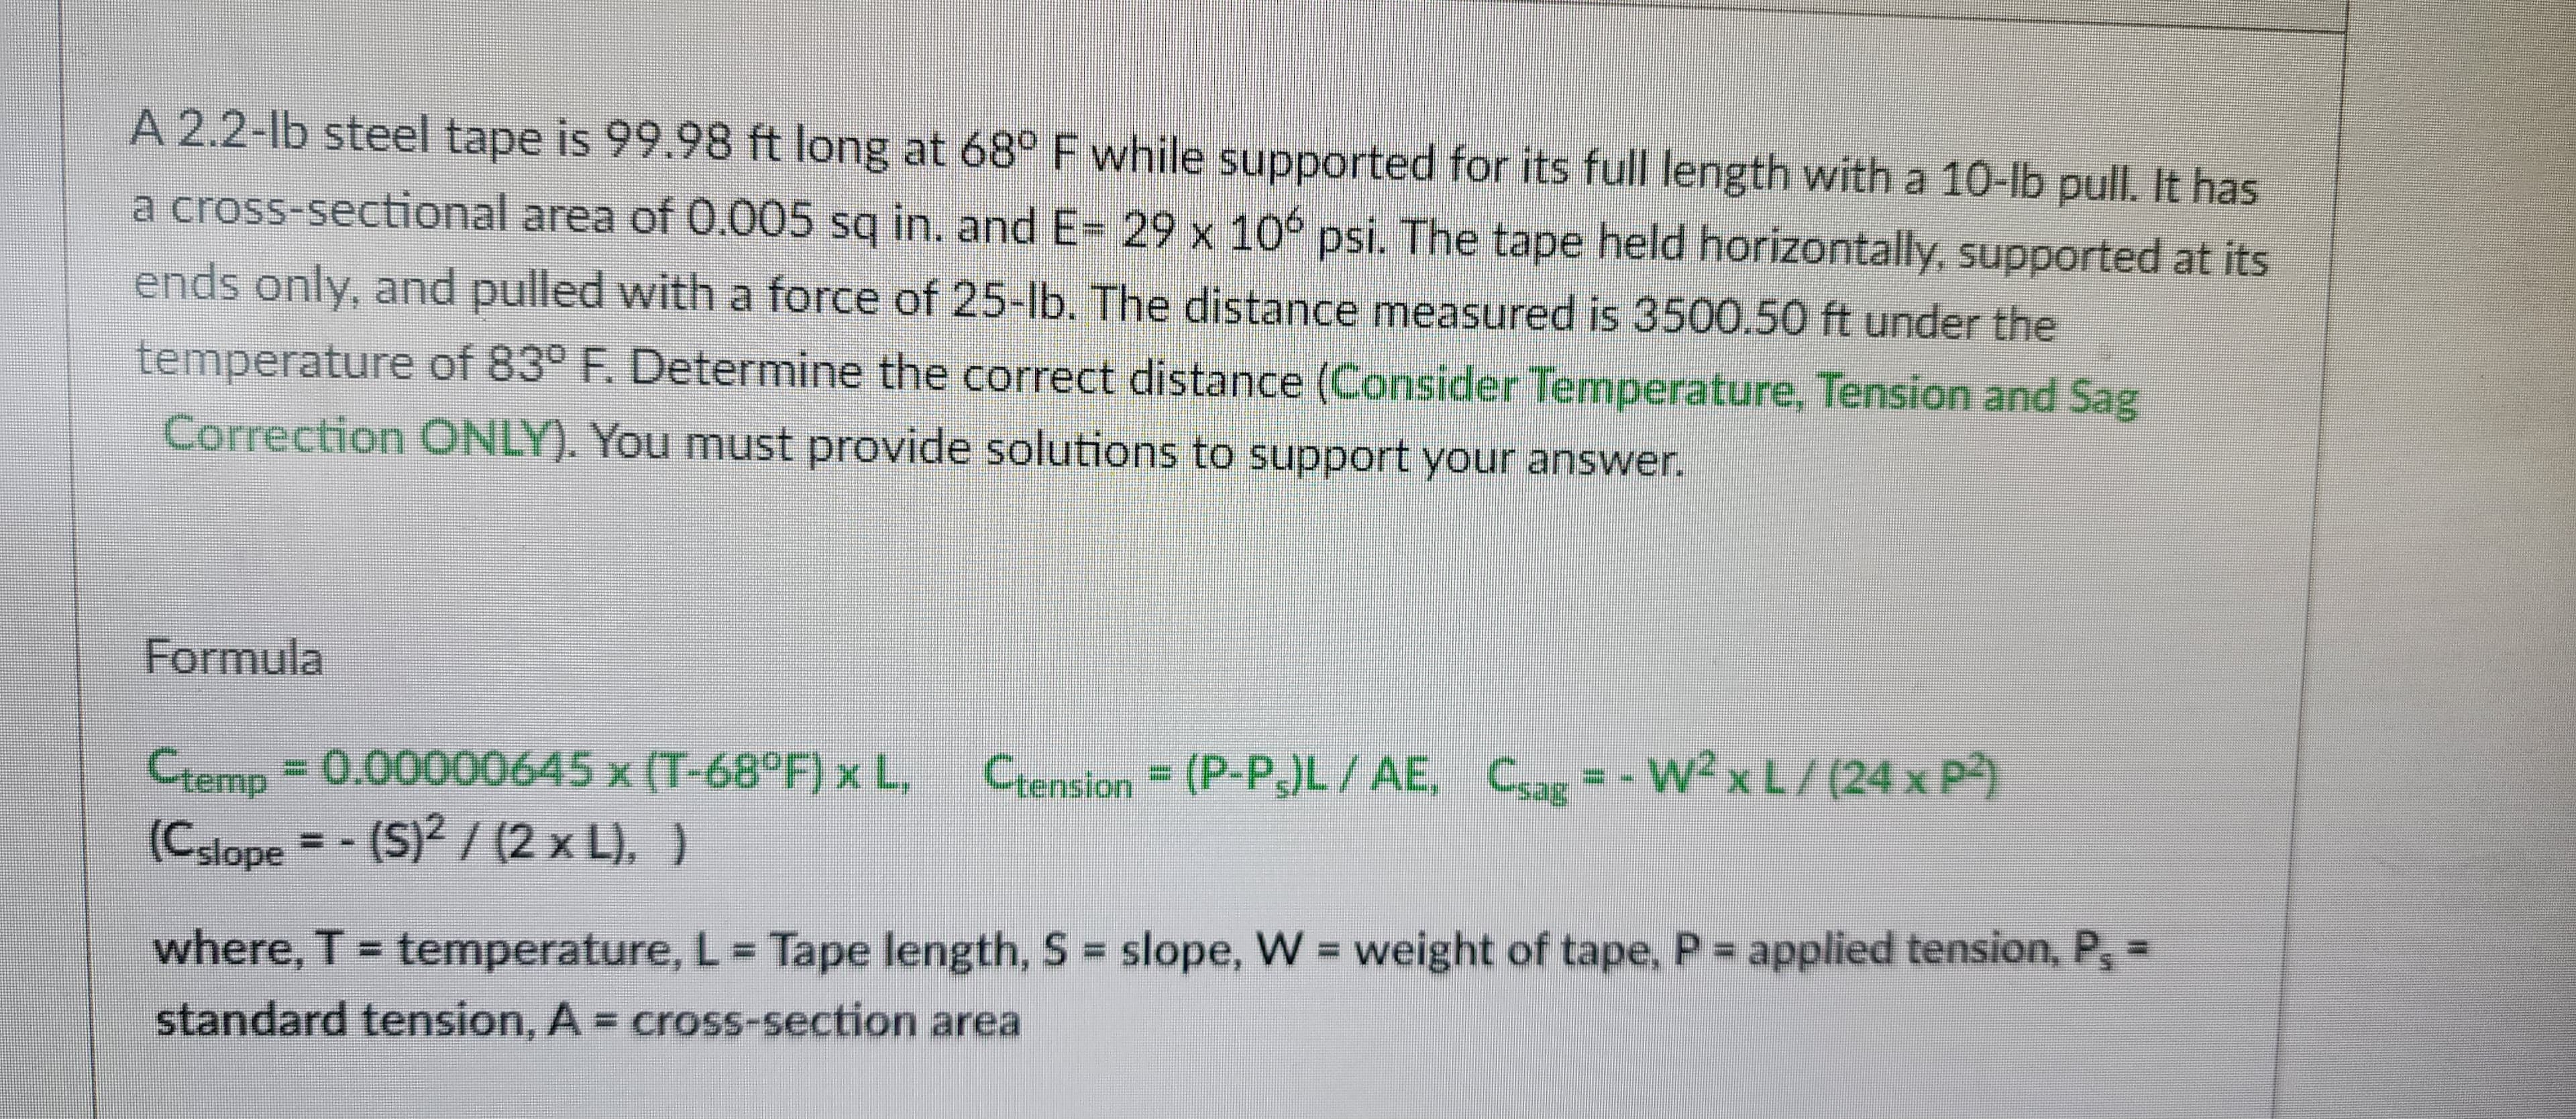 A 2.2-lb steel tape is 99.98 ft long at 68° F while supported for its full length with a 10-lb pull. It has
a cross-sectional area of 0.005 sq in. and E= 29 x 106 psi. The tape held horizontally, supported at its
ends only, and pulled with a force of 25-lb. The distance measured is 3500.50 ft under the
temperature of 83° F. Determine the correct distance (Consider Temperature, Tension and Sag
Correction ONLY). You must provide solutions to support your answer.
Formula
Ctemp = 0.00000645 x (T-68°F) x L, Ctension = (P-Ps)L/AE, Csag = - W² x L / (24 x P²)
(Cslope = -(S)² / (2 x L), )
where, T = temperature, L = Tape length, S = slope, W = weight of tape, P = applied tension, P, =
standard tension, A = cross-section area